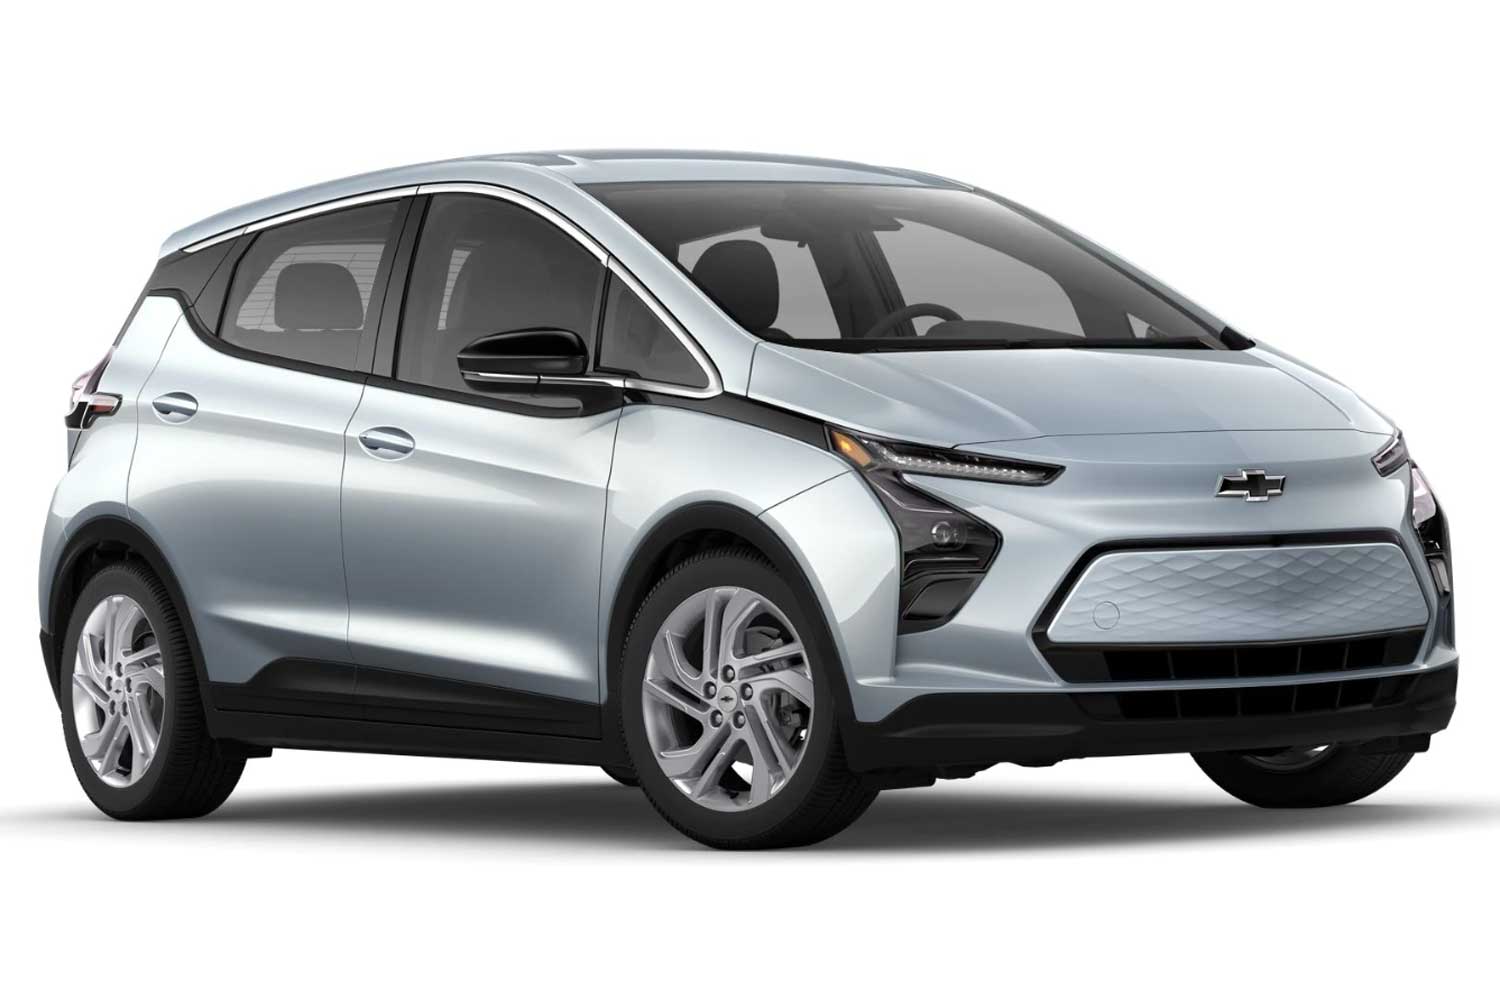 2022 Chevy Bolt EV Gets New Silver Flare Metallic Color